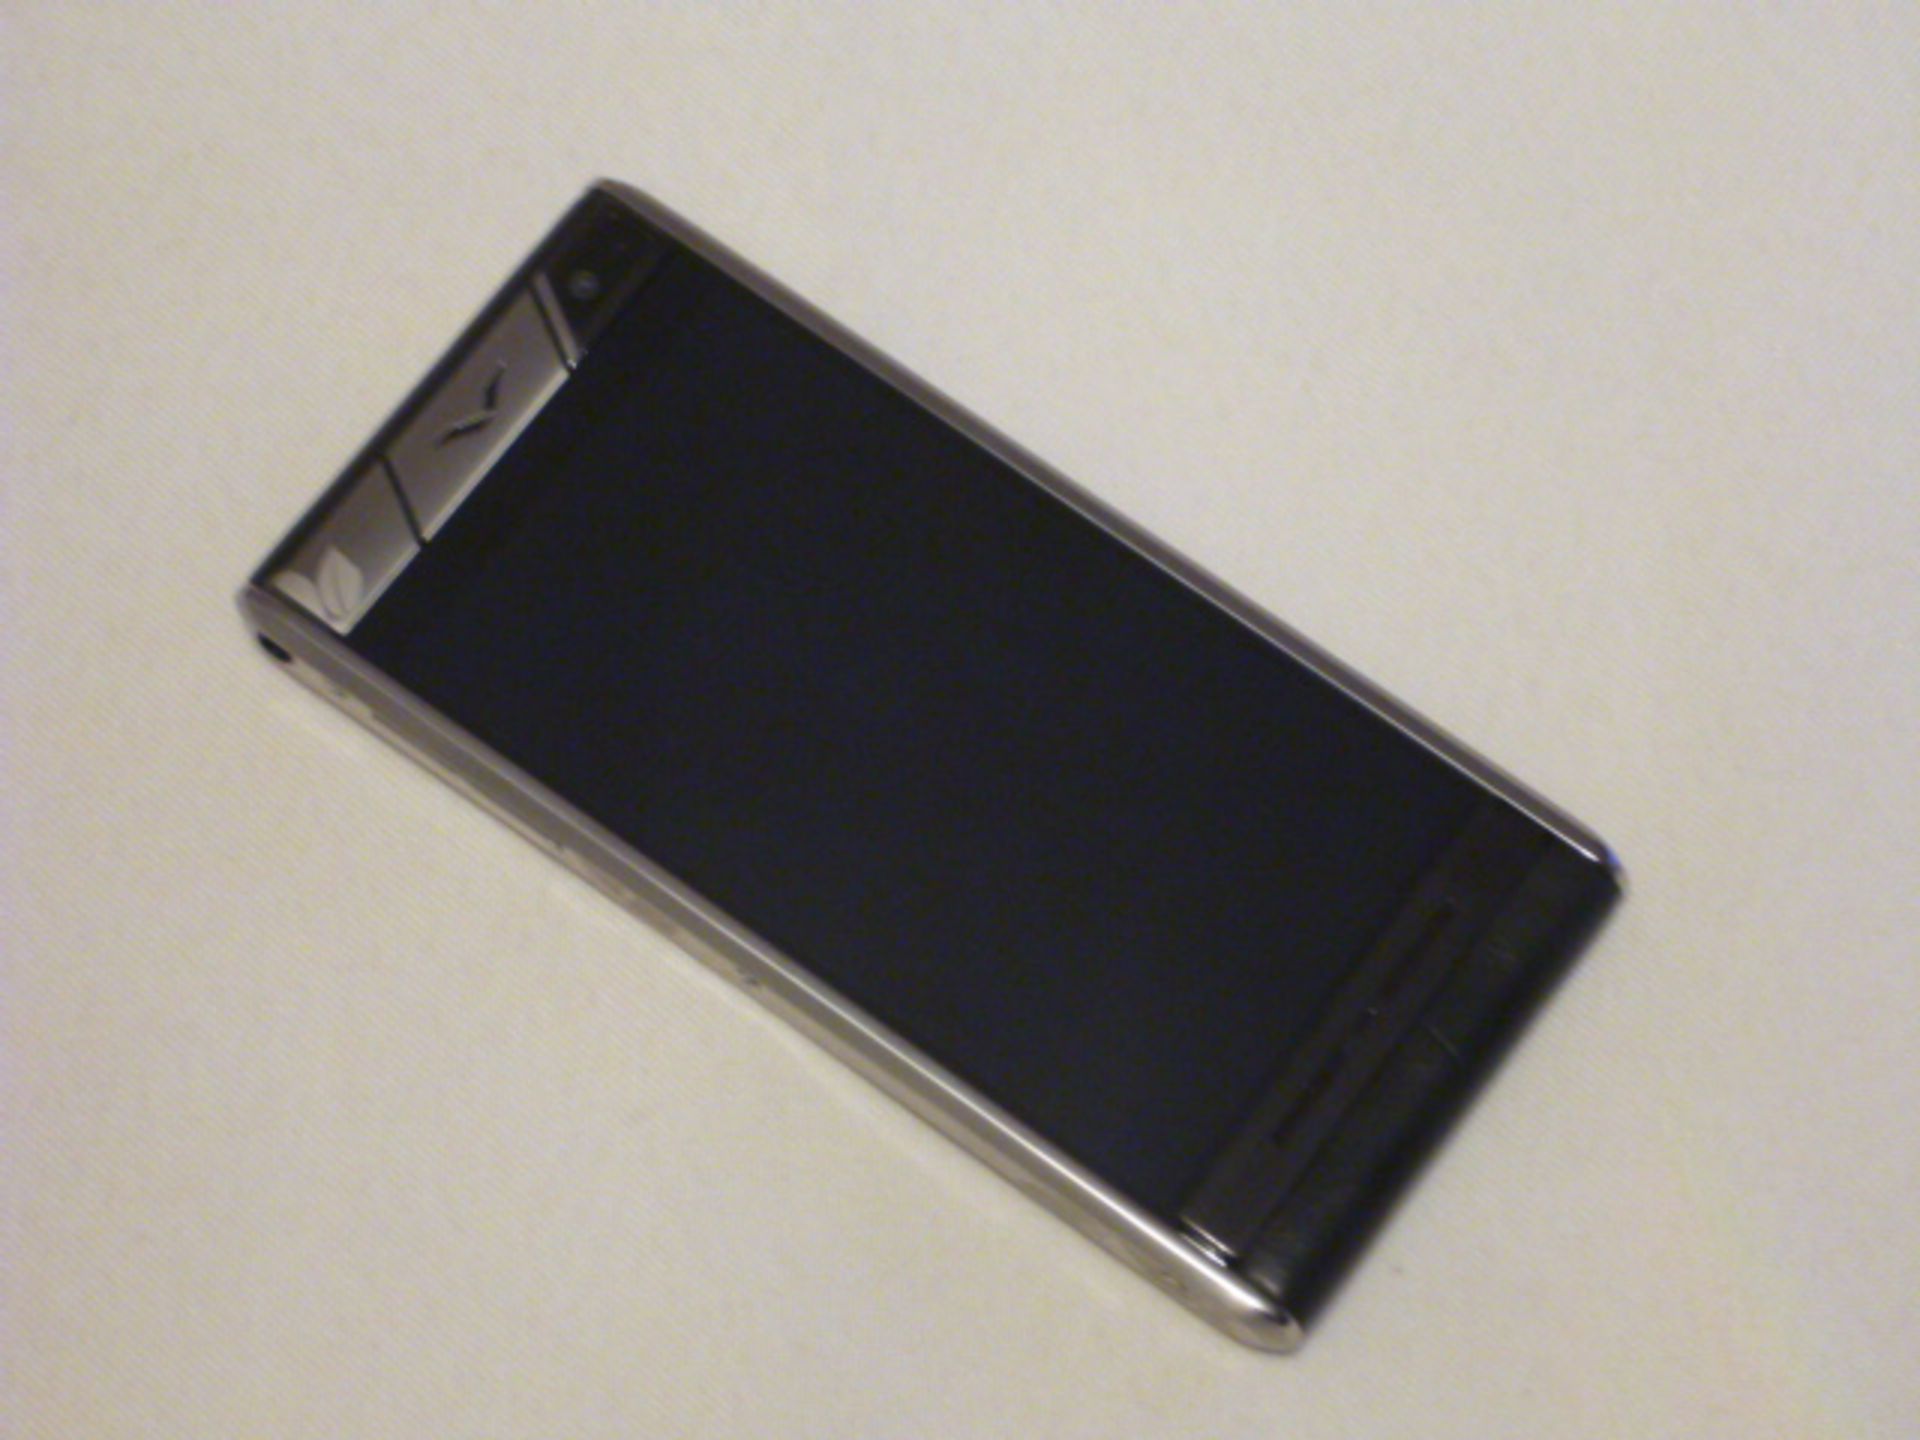 Vertu Aster Touch Phone, Limited Edition Leaf 038/100,with Matching Leaf Leather Case. S/N I-033699.